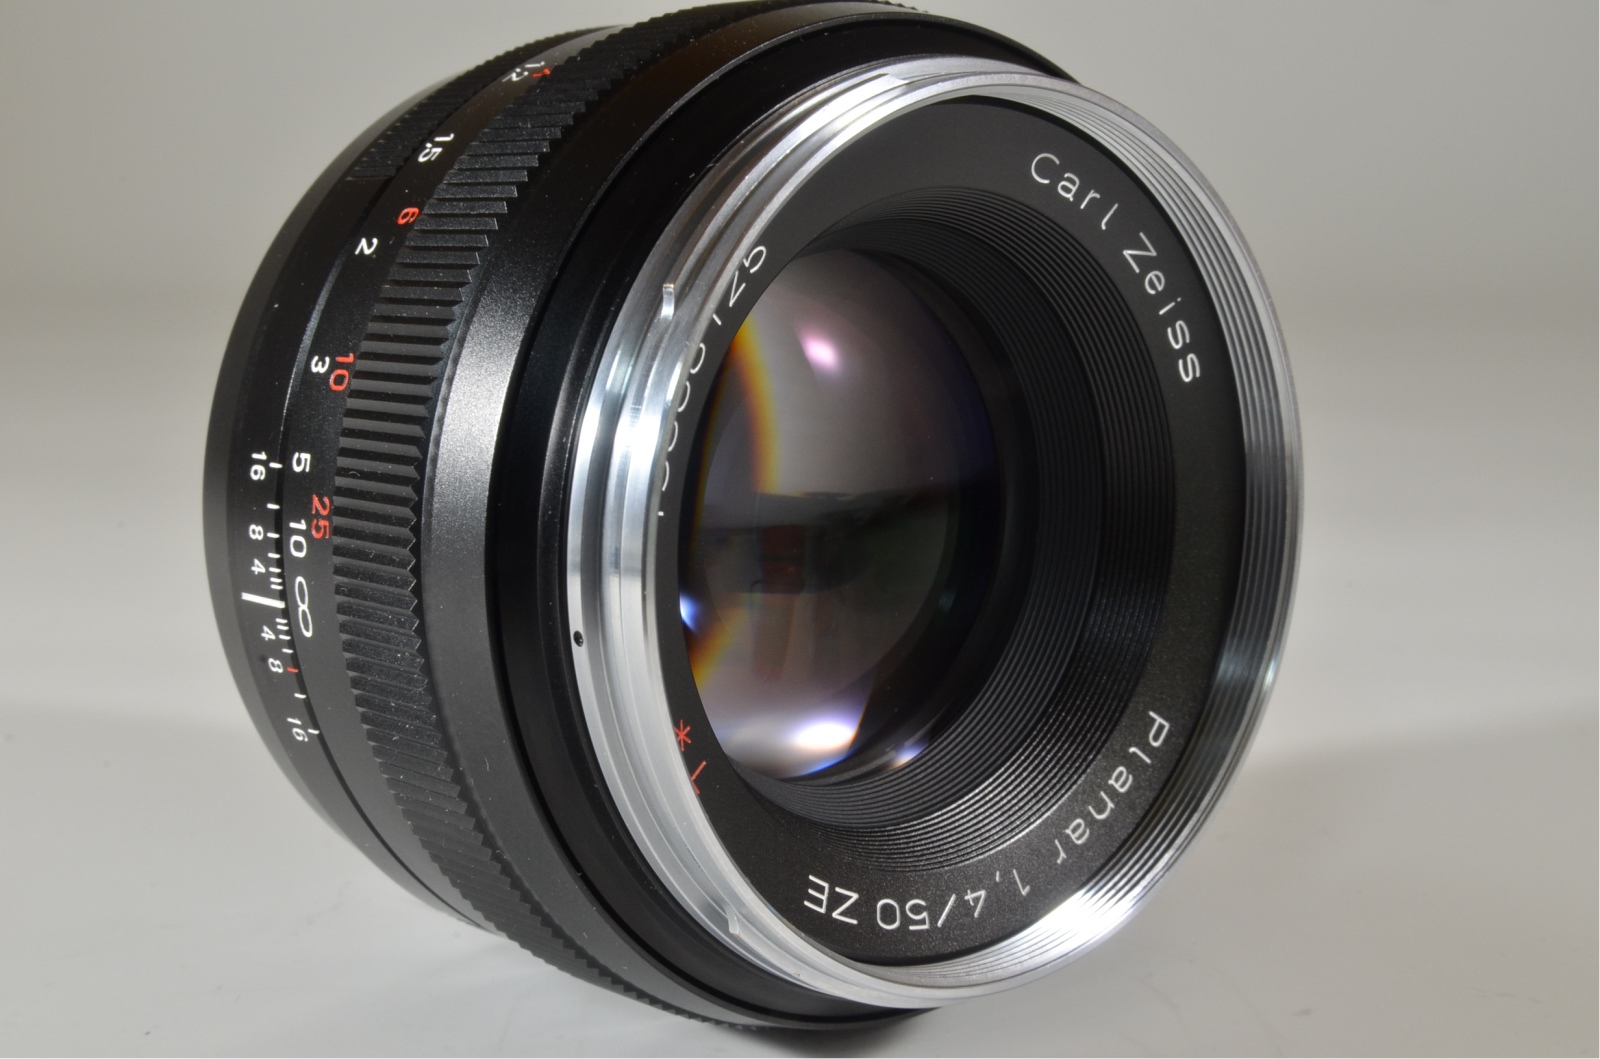 Carl Zeiss Planar T* 50mm f/1.4 ZE for Canon #a0045 – SuperB JAPAN